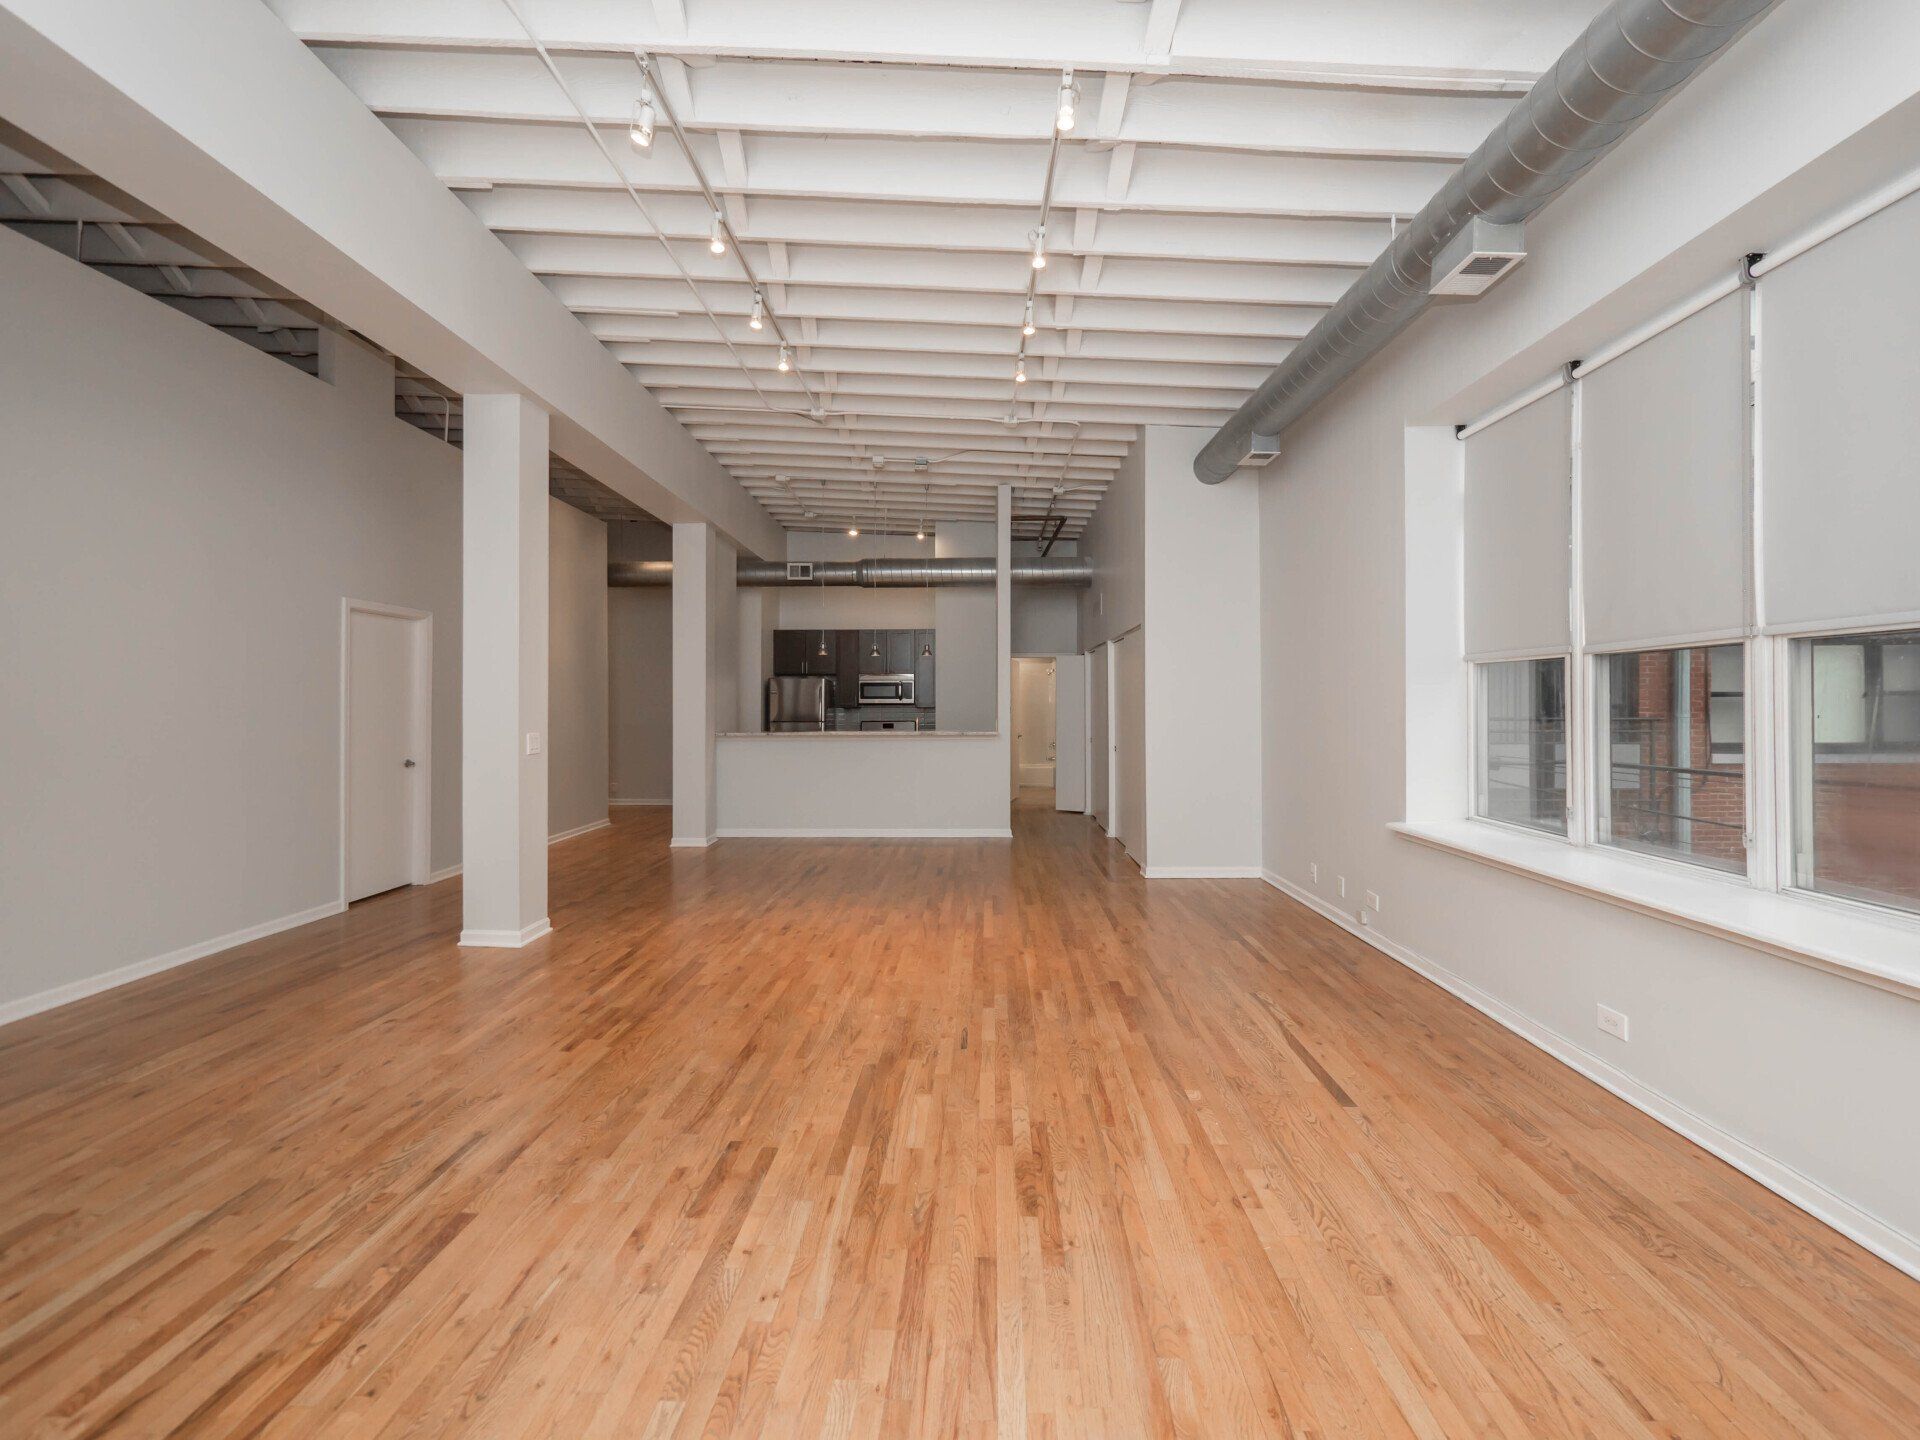 A large empty room with hardwood floors and white walls at 1550 North Damen.